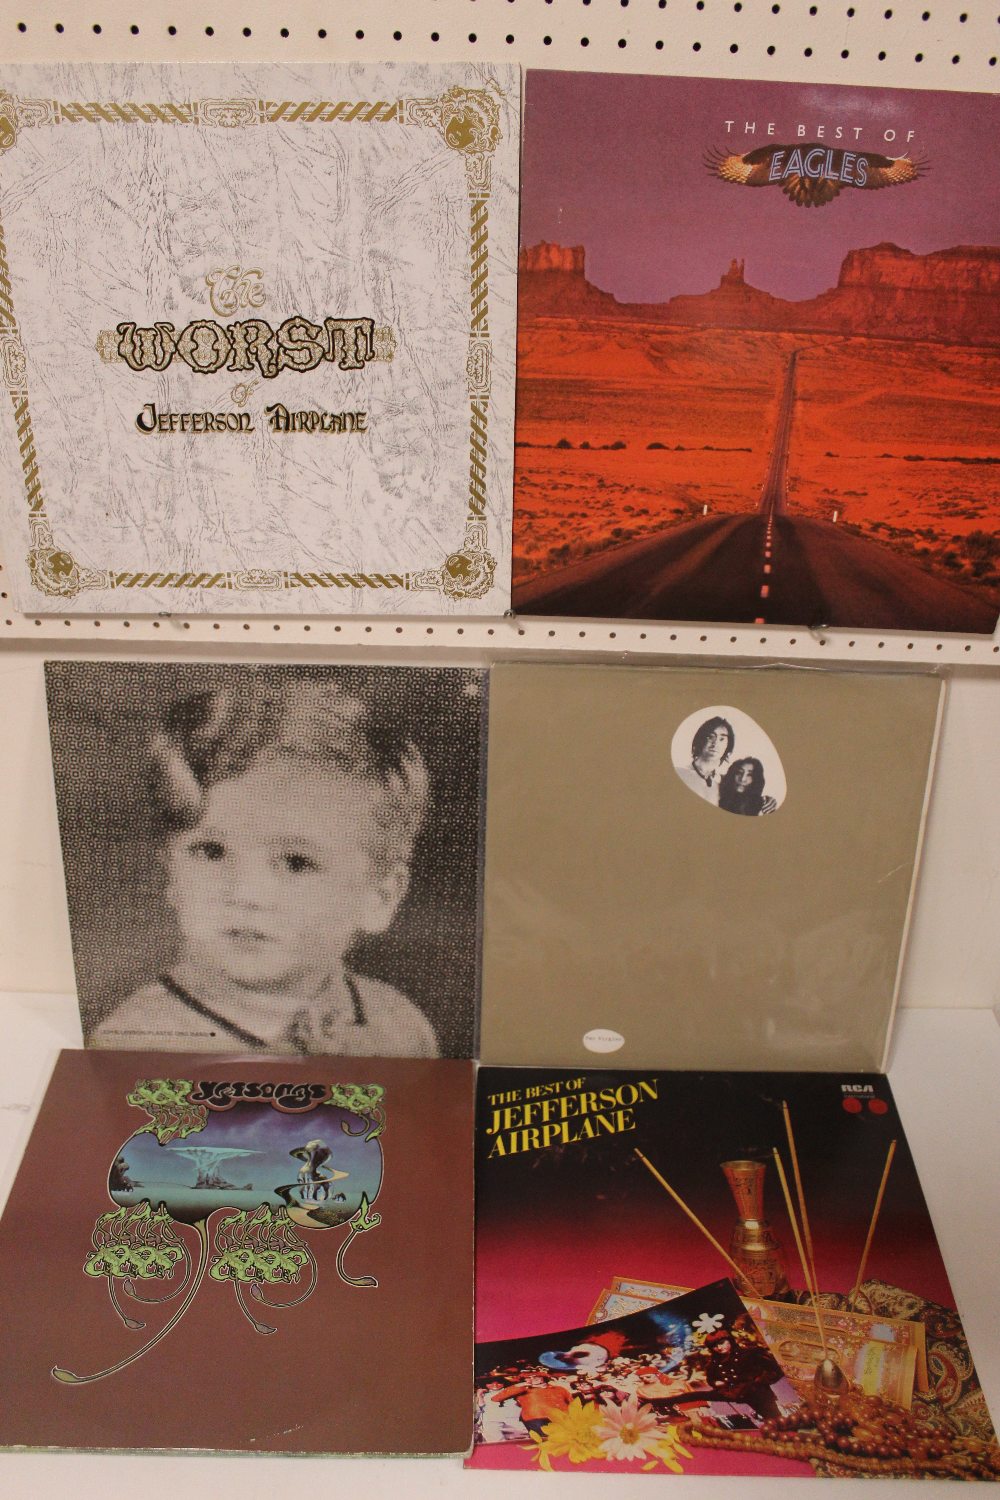 A COLLECTION OF ASSORTED LP RECORDS, various eras and artists to include David Bowie, Pink Floyd, T - Image 6 of 10